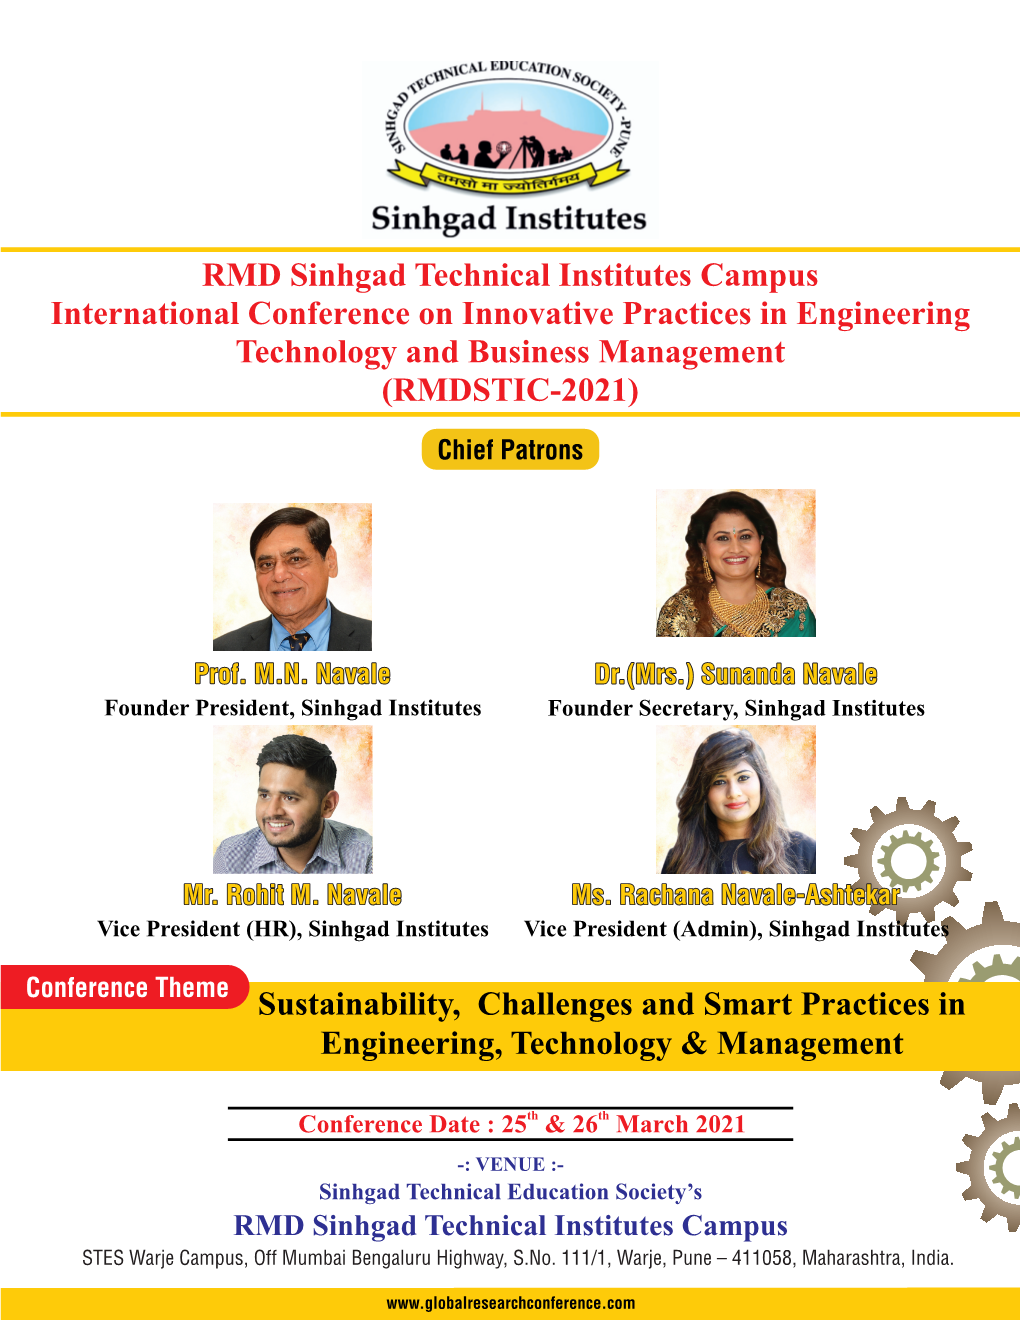 RMD Sinhgad Technical Institutes Campus International Conference on Innovative Practices in Engineering Technology and Business Management (RMDSTIC-2021)